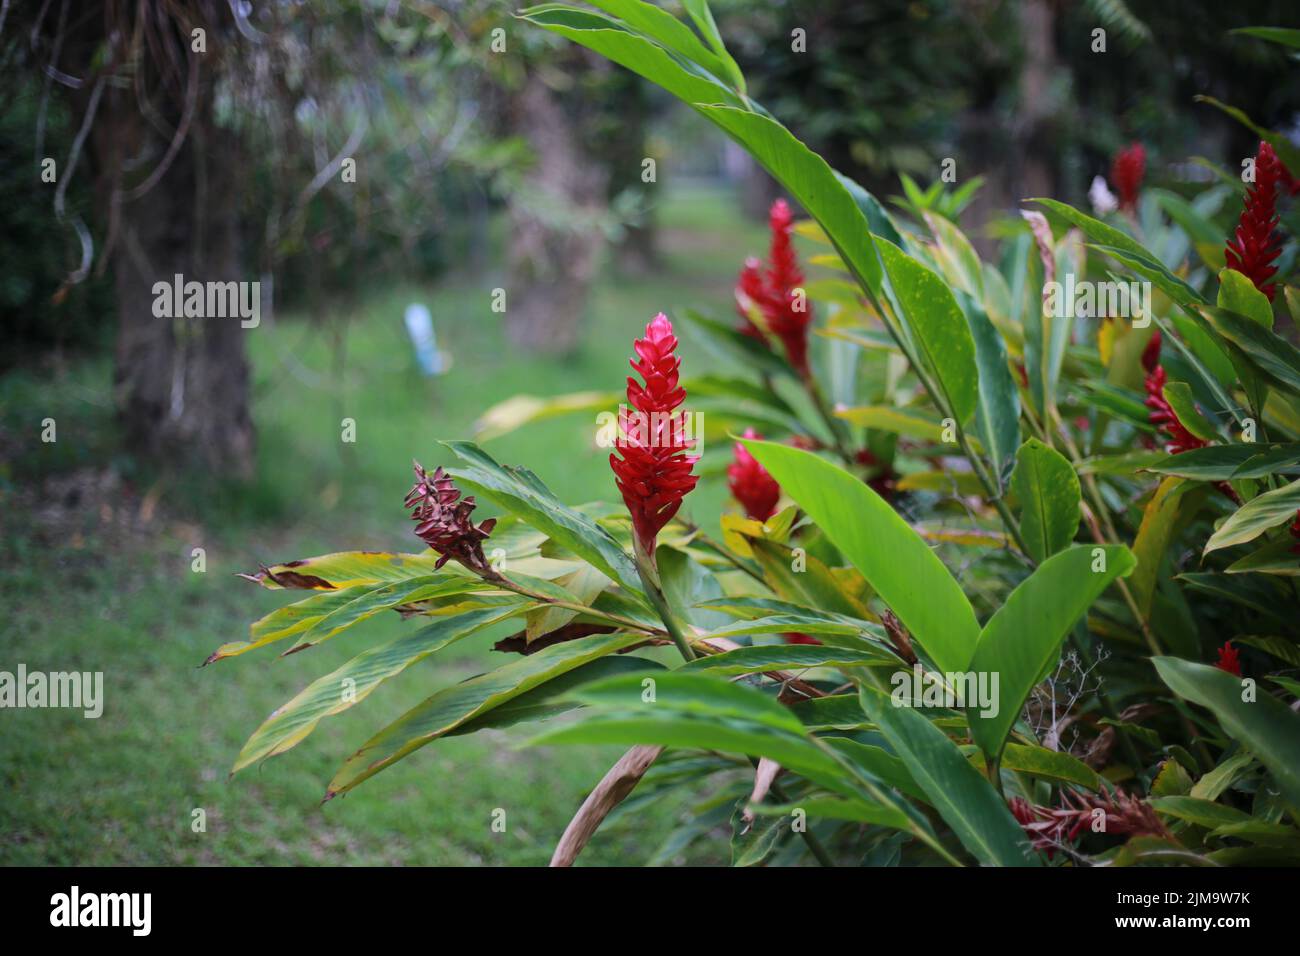 A shallow focus shot of red gingers with green leaves in daylight in a garden Stock Photo